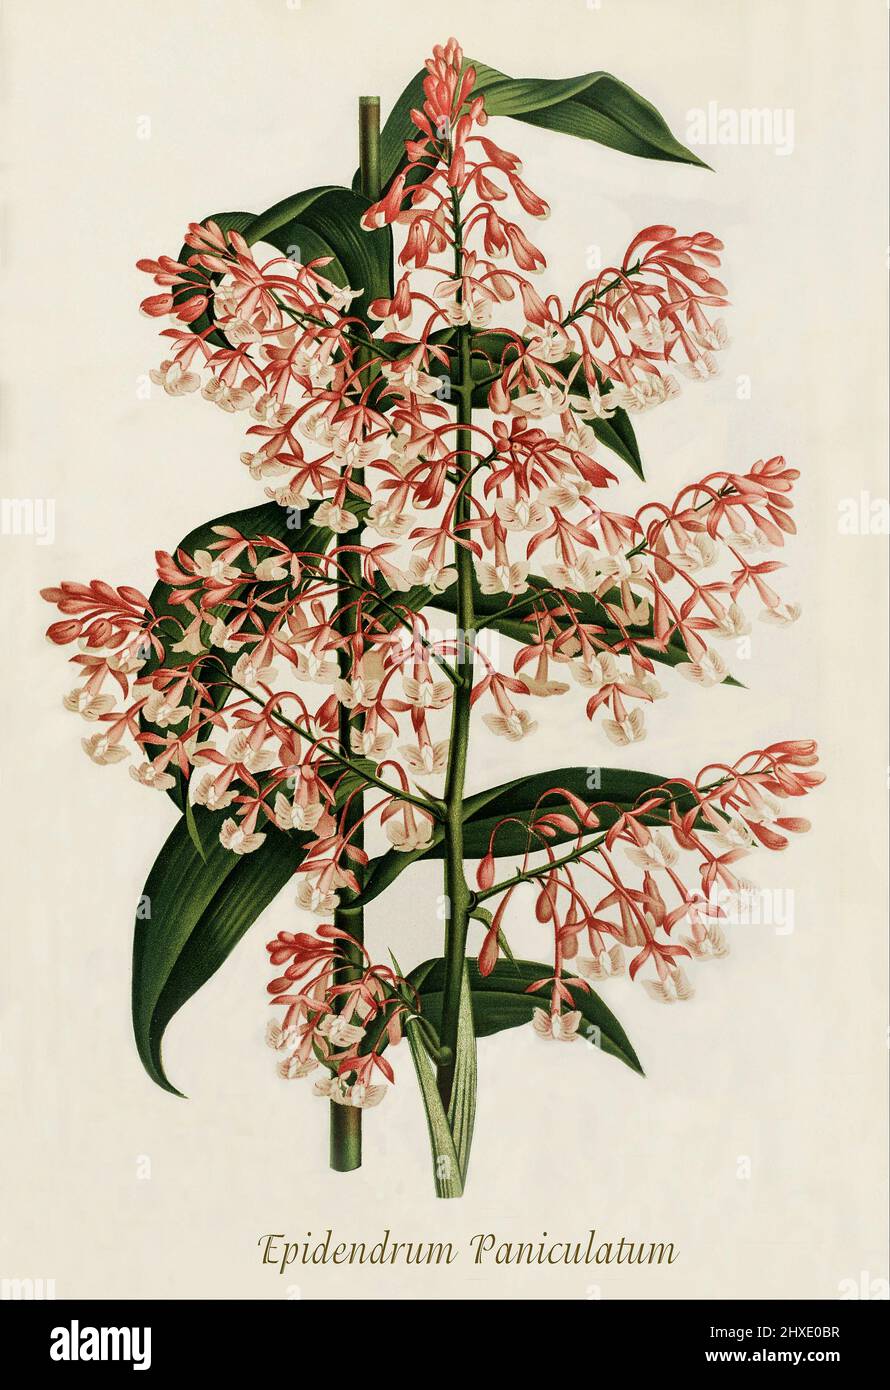 Epidendrum paniculatum, a species of orchid in the genus Epidendrum, found in the forest of Central and South America at elevations up to 2100 meters. From Iconographie des Orchidees, a magazine of botanical illustrations published by Jean Jules Linden (1817-1898) was a Belgian botanist, explorer and horticulturist who specialised in orchids. Stock Photo